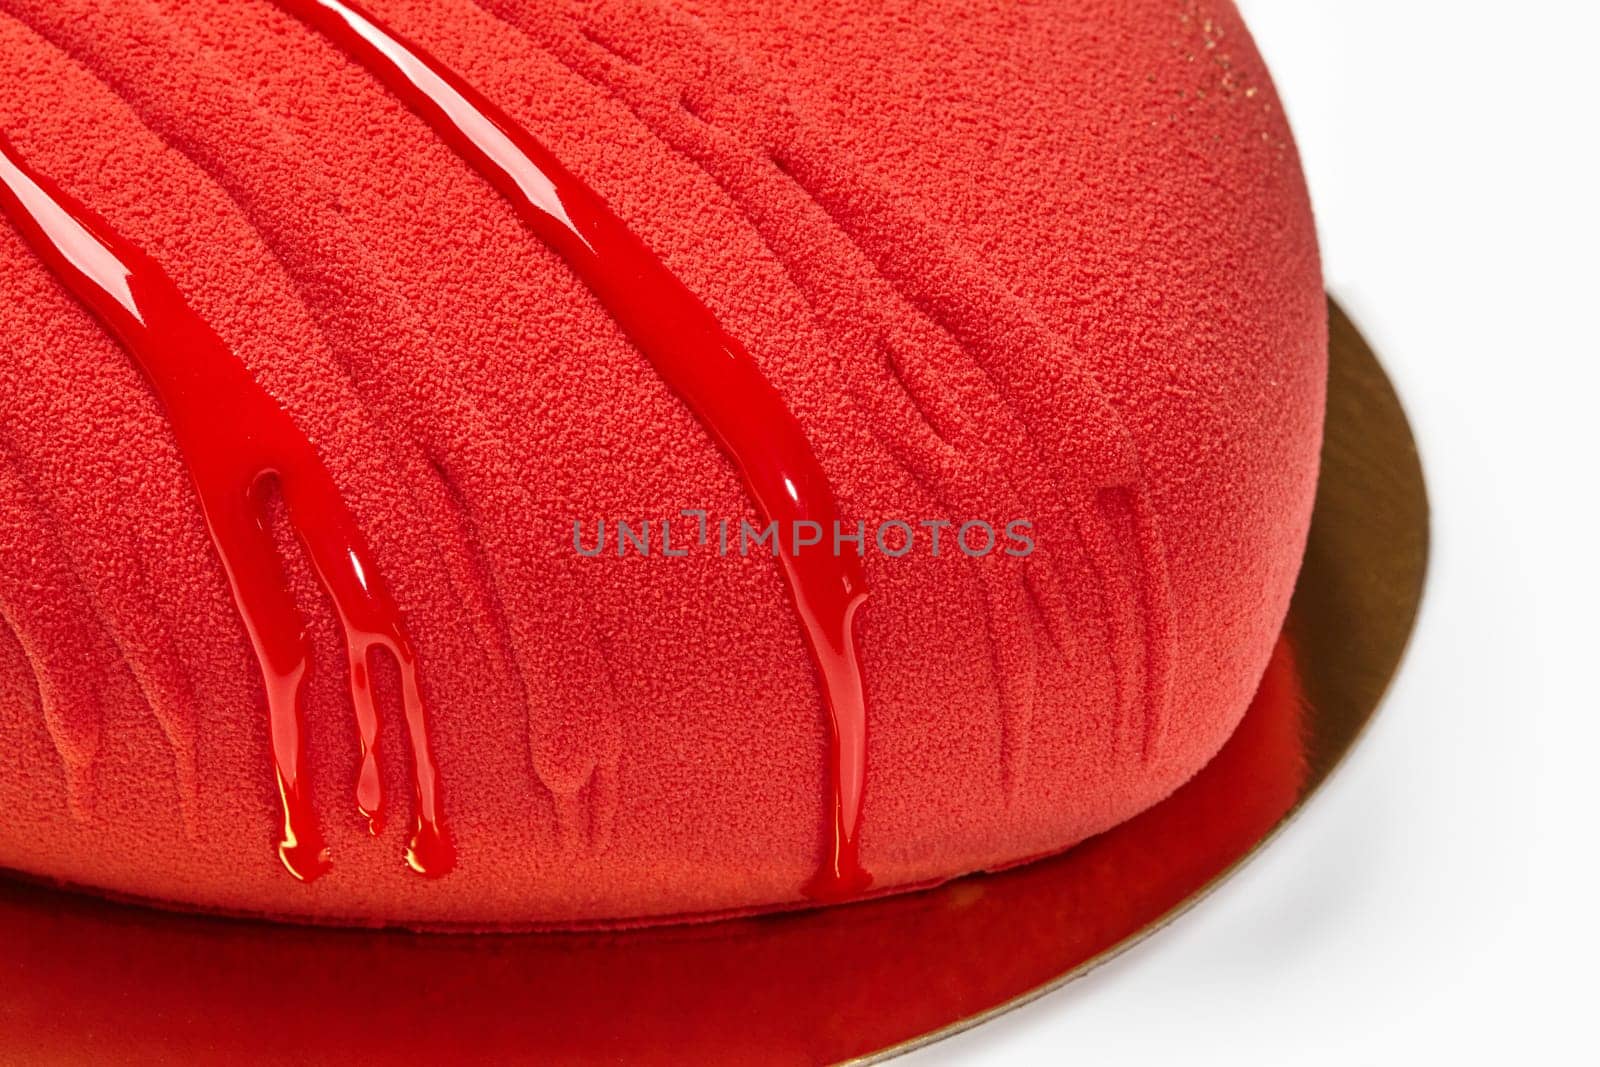 Close-up view of heart-shaped red mousse cake with velvety texture, drizzled with glossy glaze on reflective golden base. Stylish designer dessert